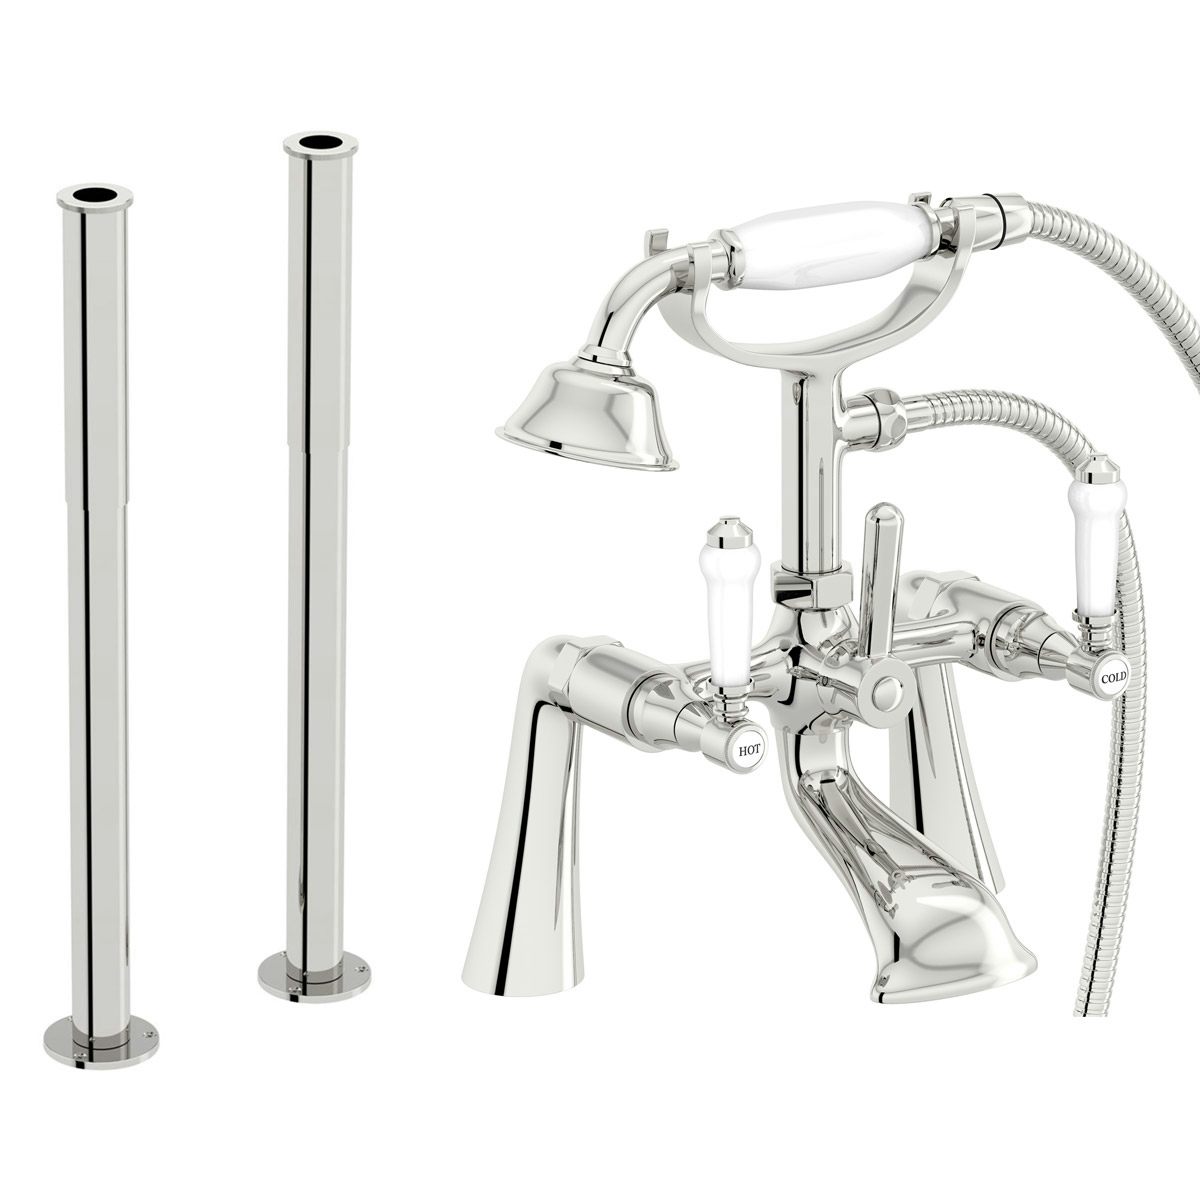 Orchard Winchester bath shower mixer and adjustable standpipe pack